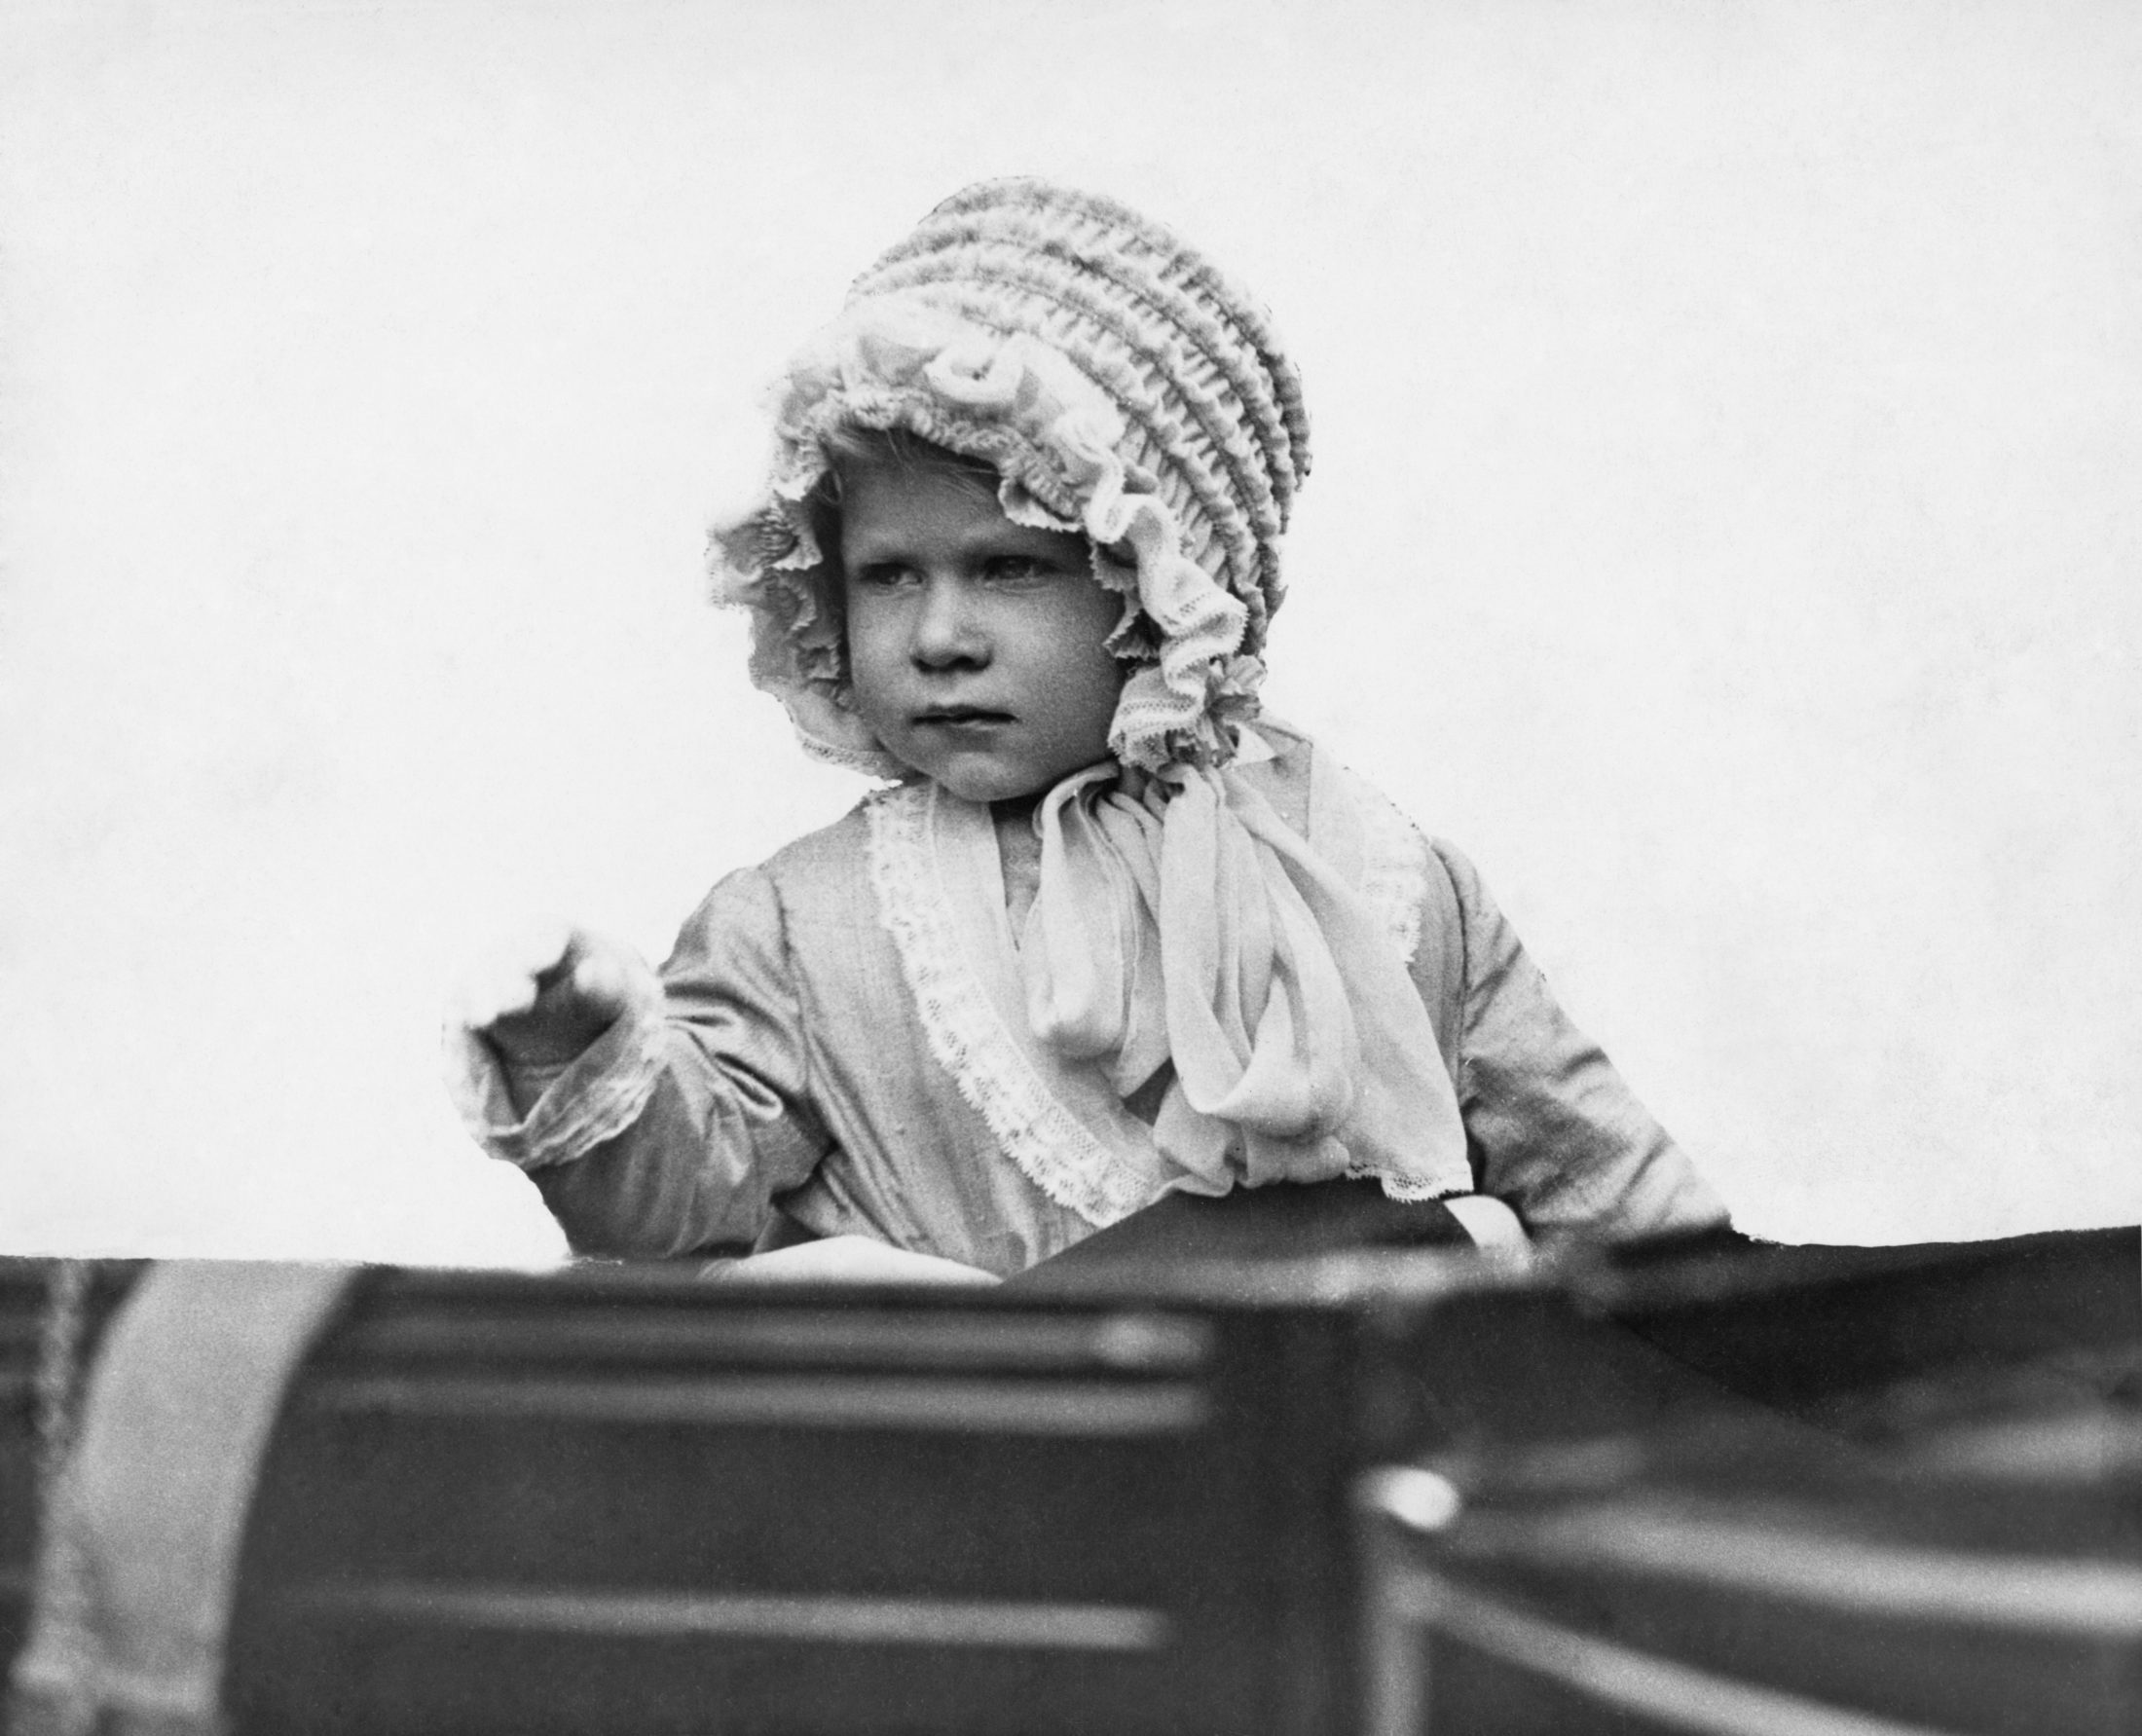 The young Princess Elizabeth, seen here in 1928, already demonstrates a fancy for elaborate hats. Photo by Central Press/Hulton Archive/Getty Images